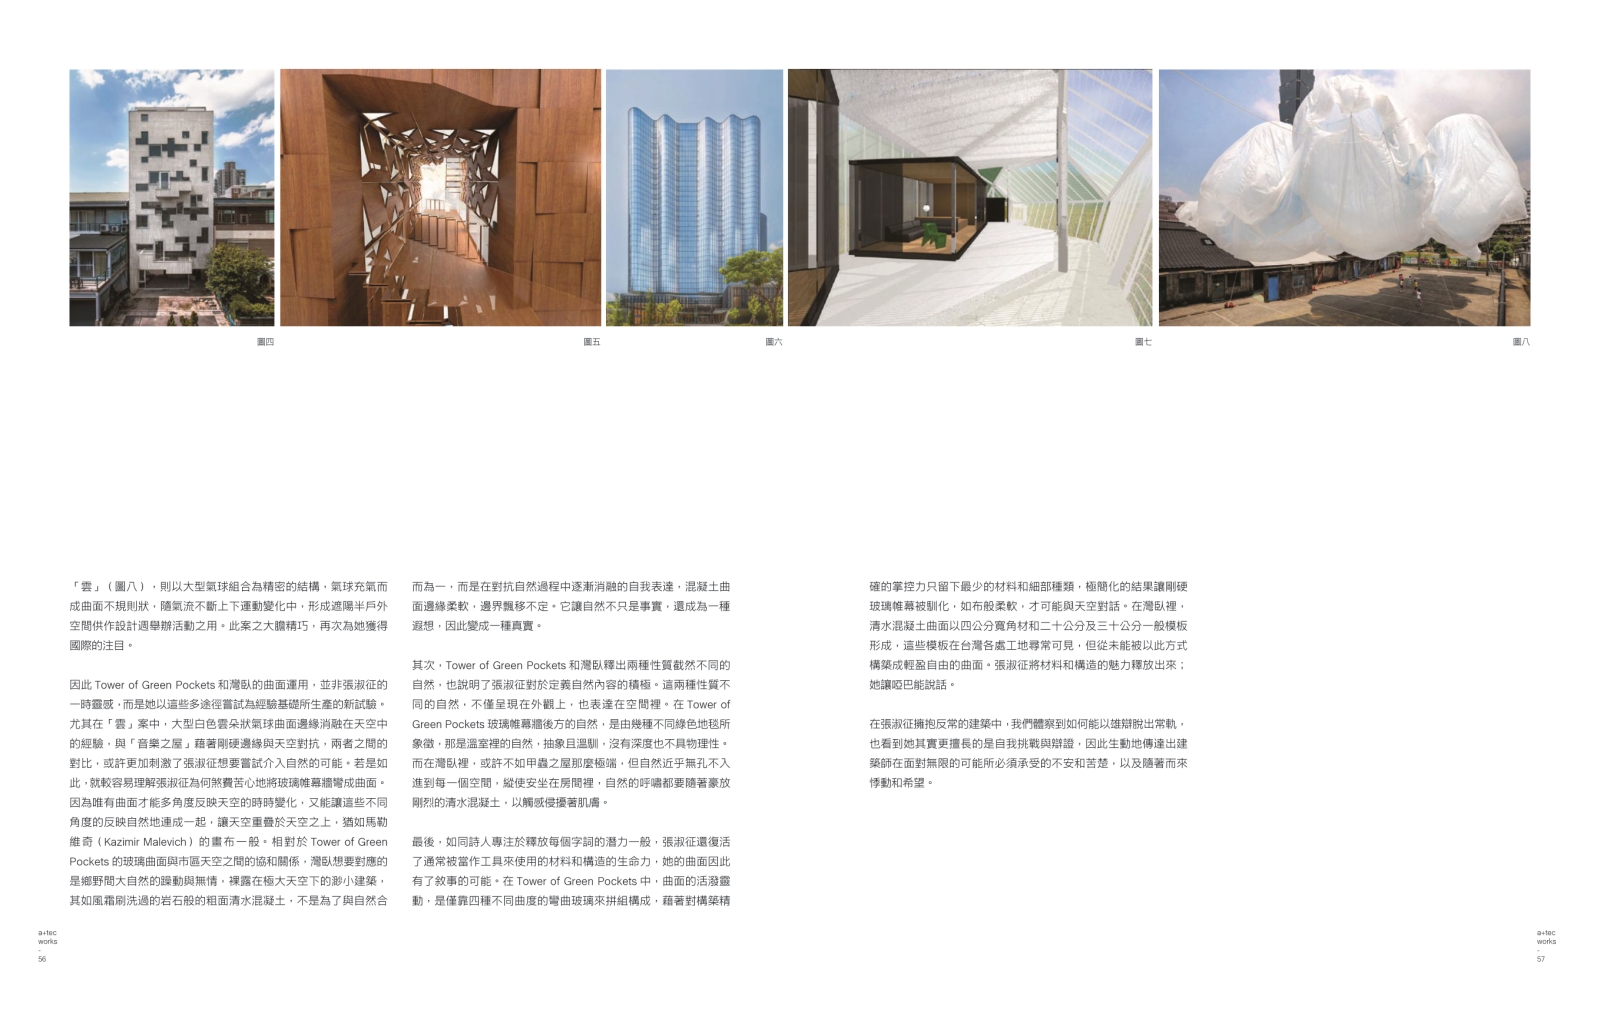 The archi-tec magazine reported the Wandering Walls